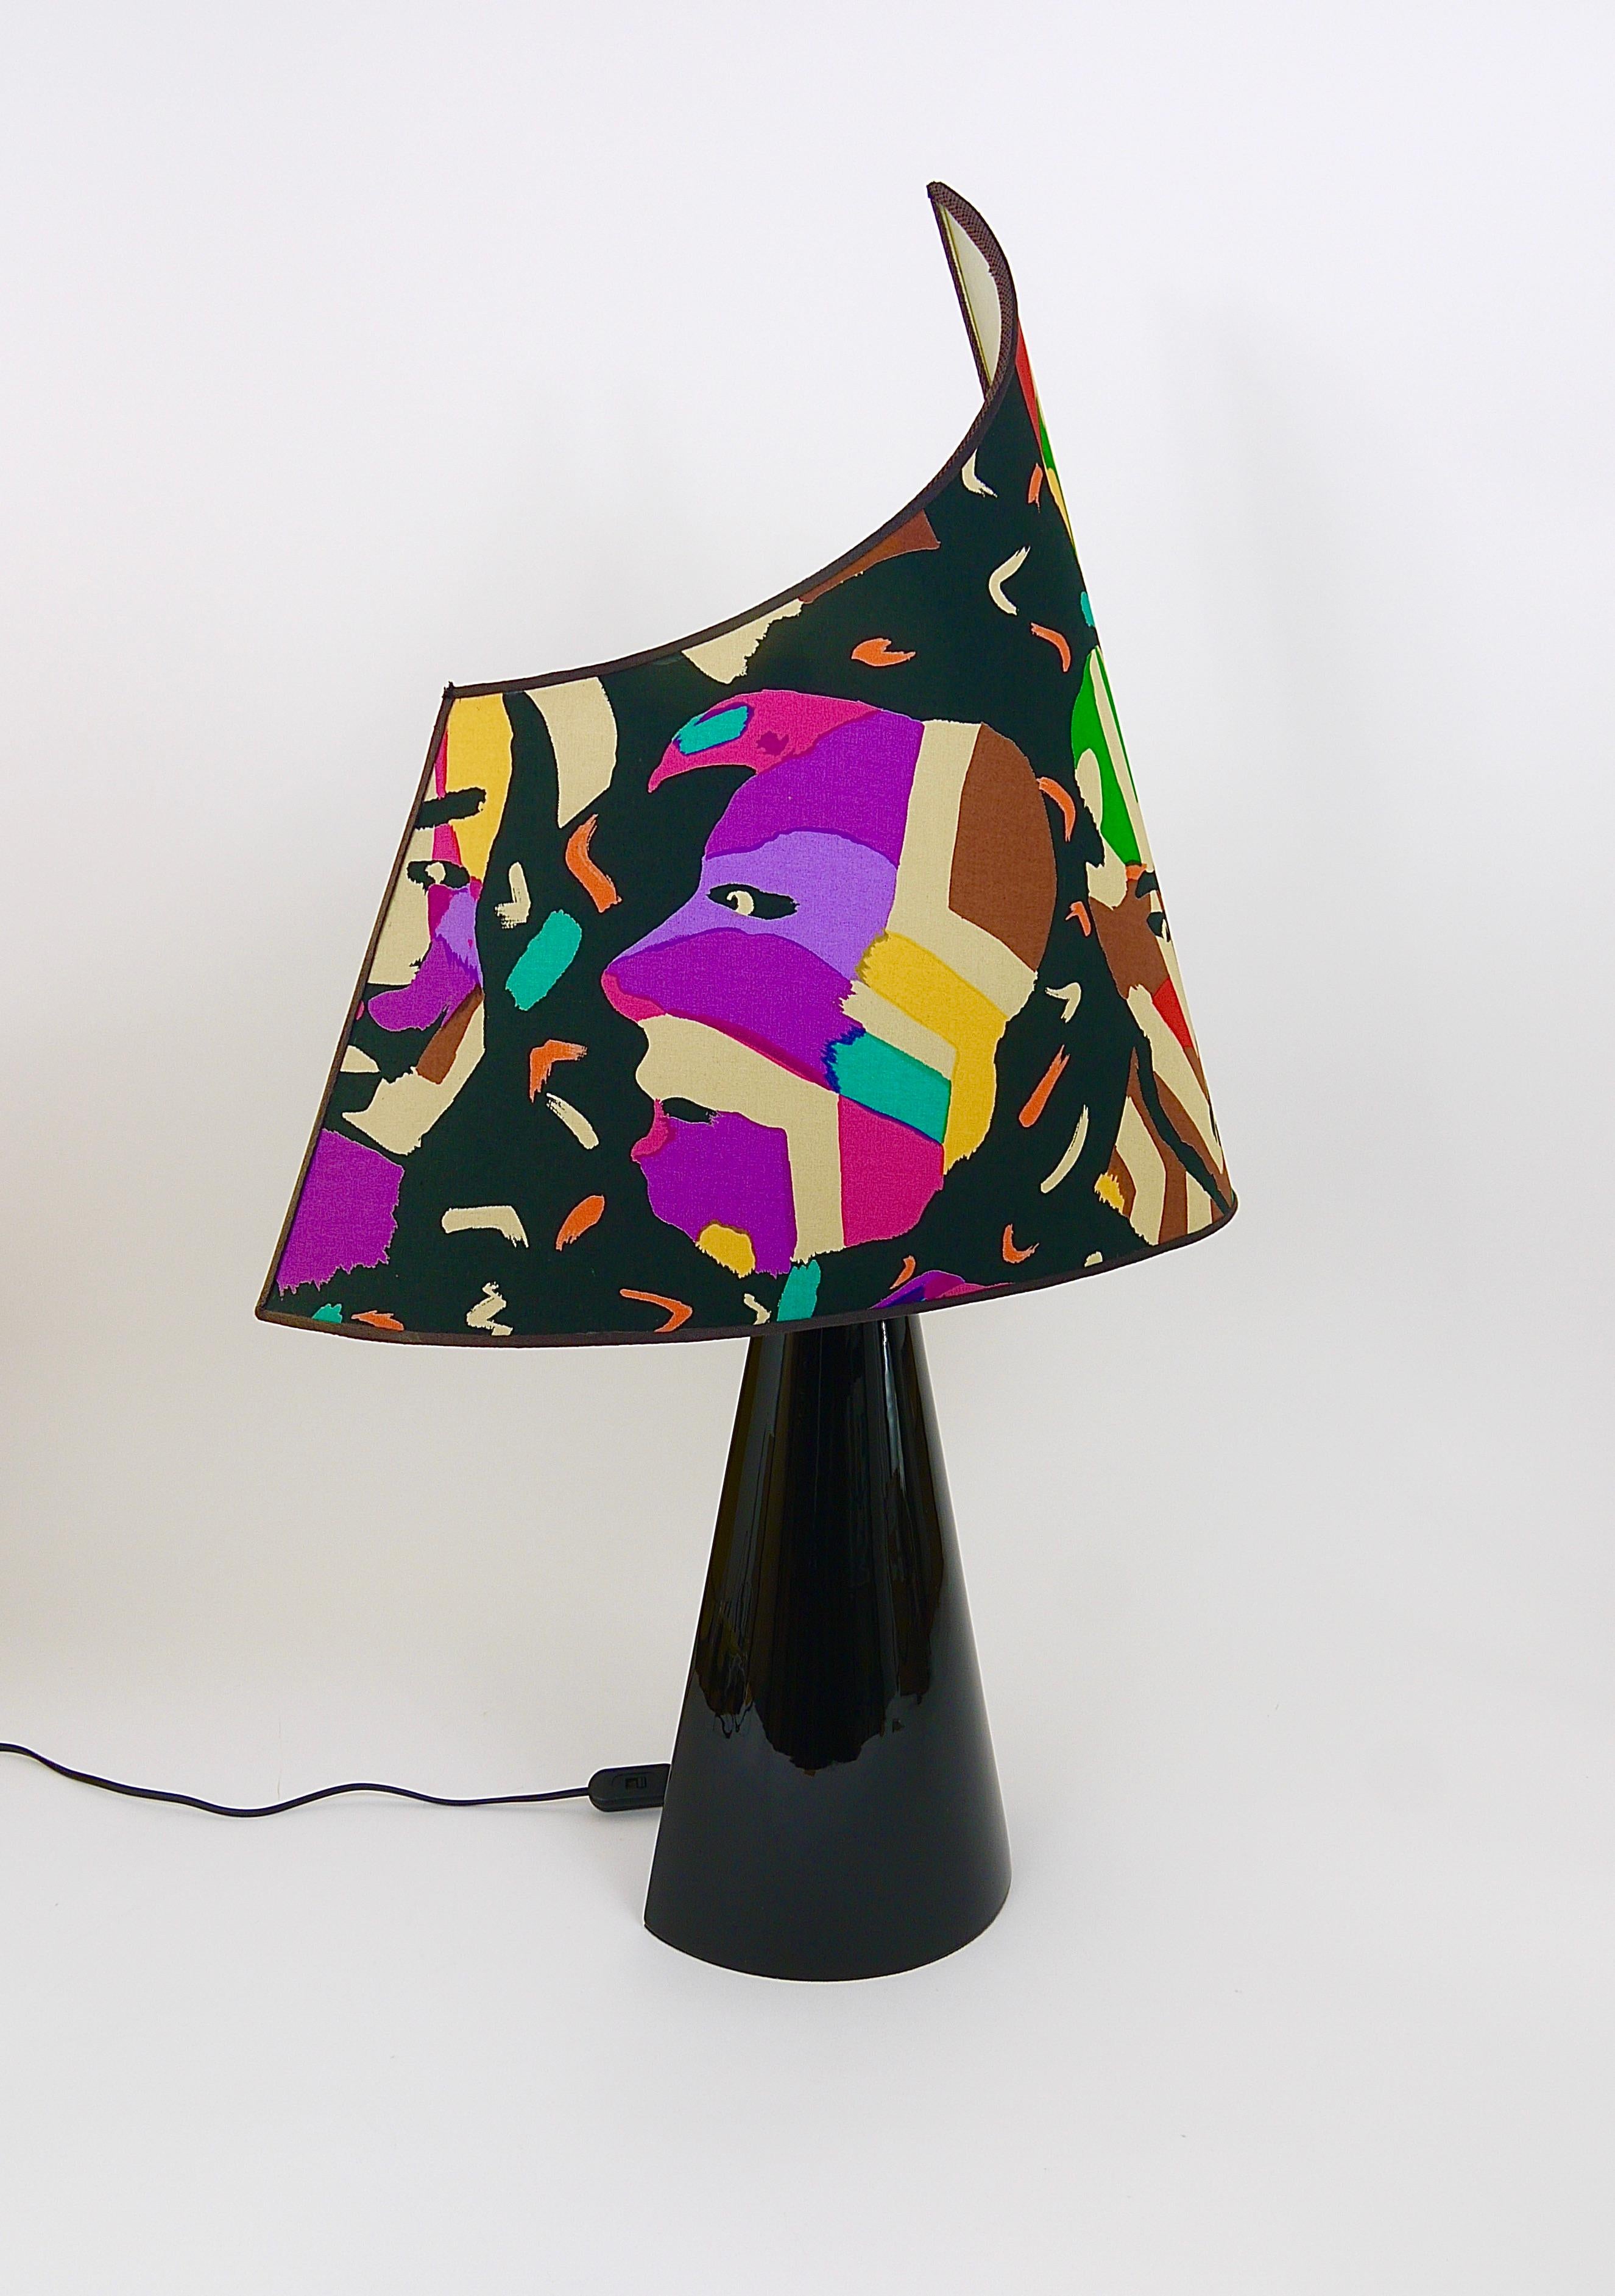 Metal Post-Modern Missoni Table Lamp by Massimo Valloto, Italy, 1980s For Sale